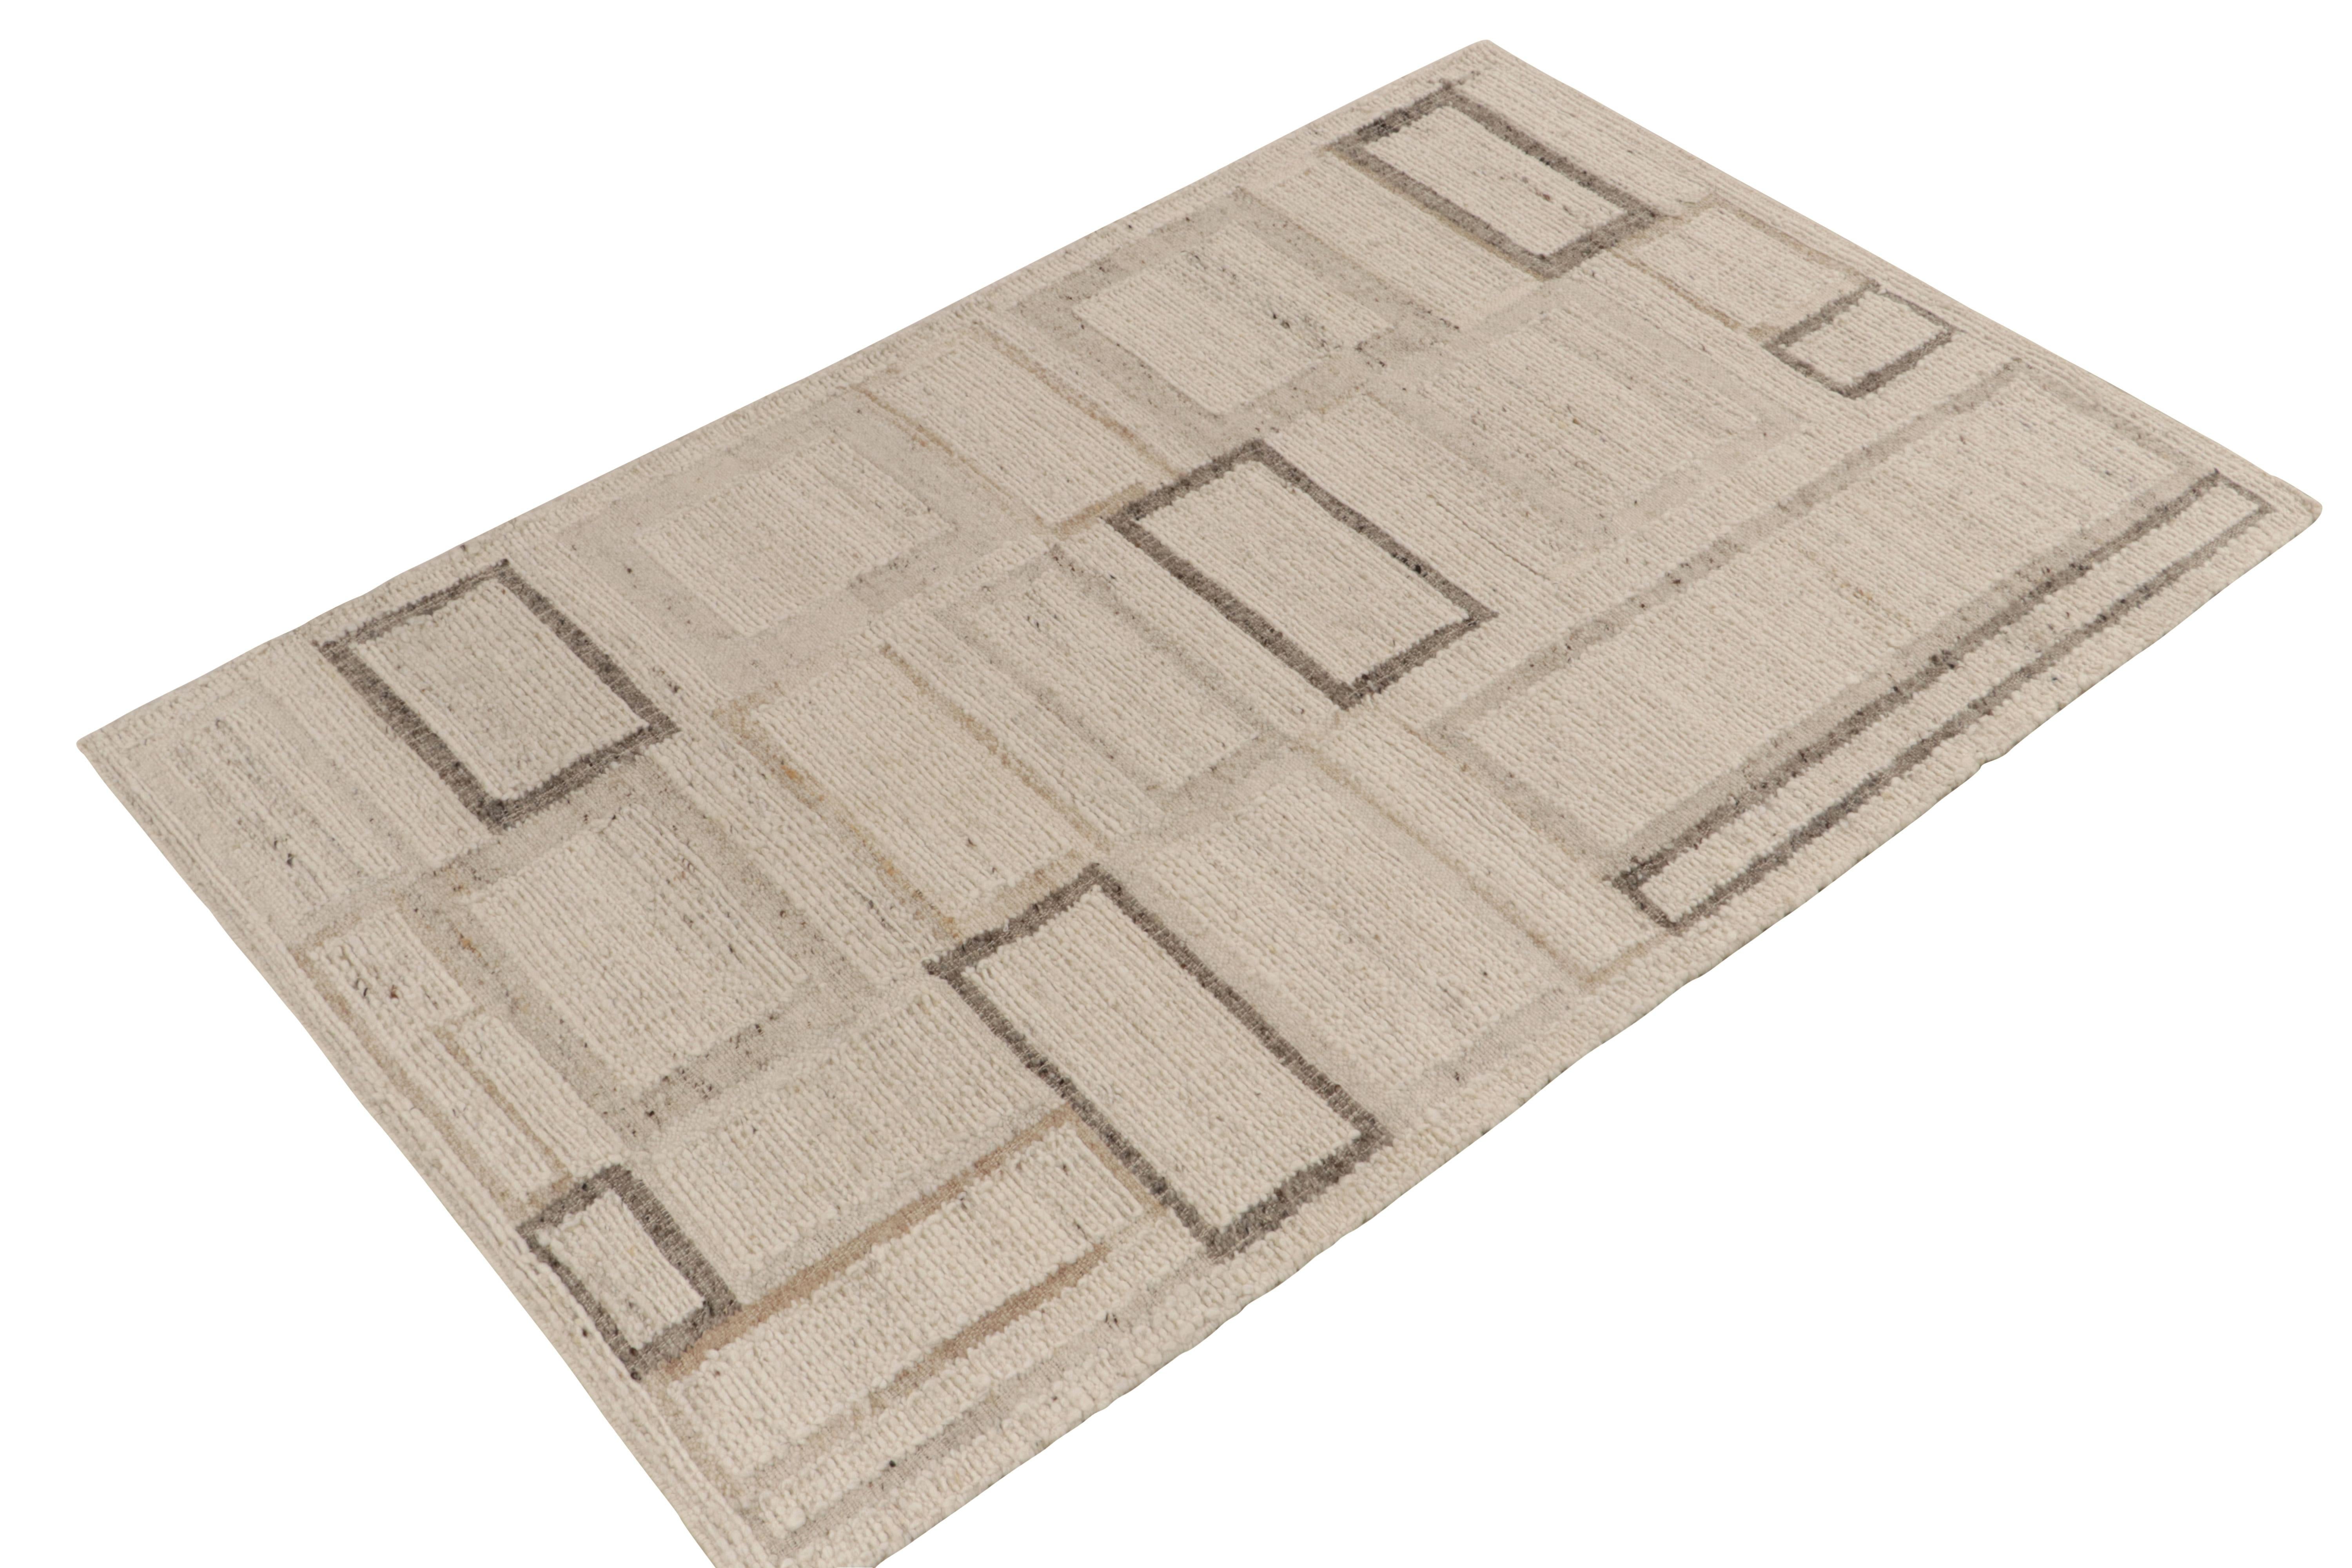 Indian Rug & Kilim's Contemporary Kilim Rug in Beige-Brown Art Deco Pattern For Sale